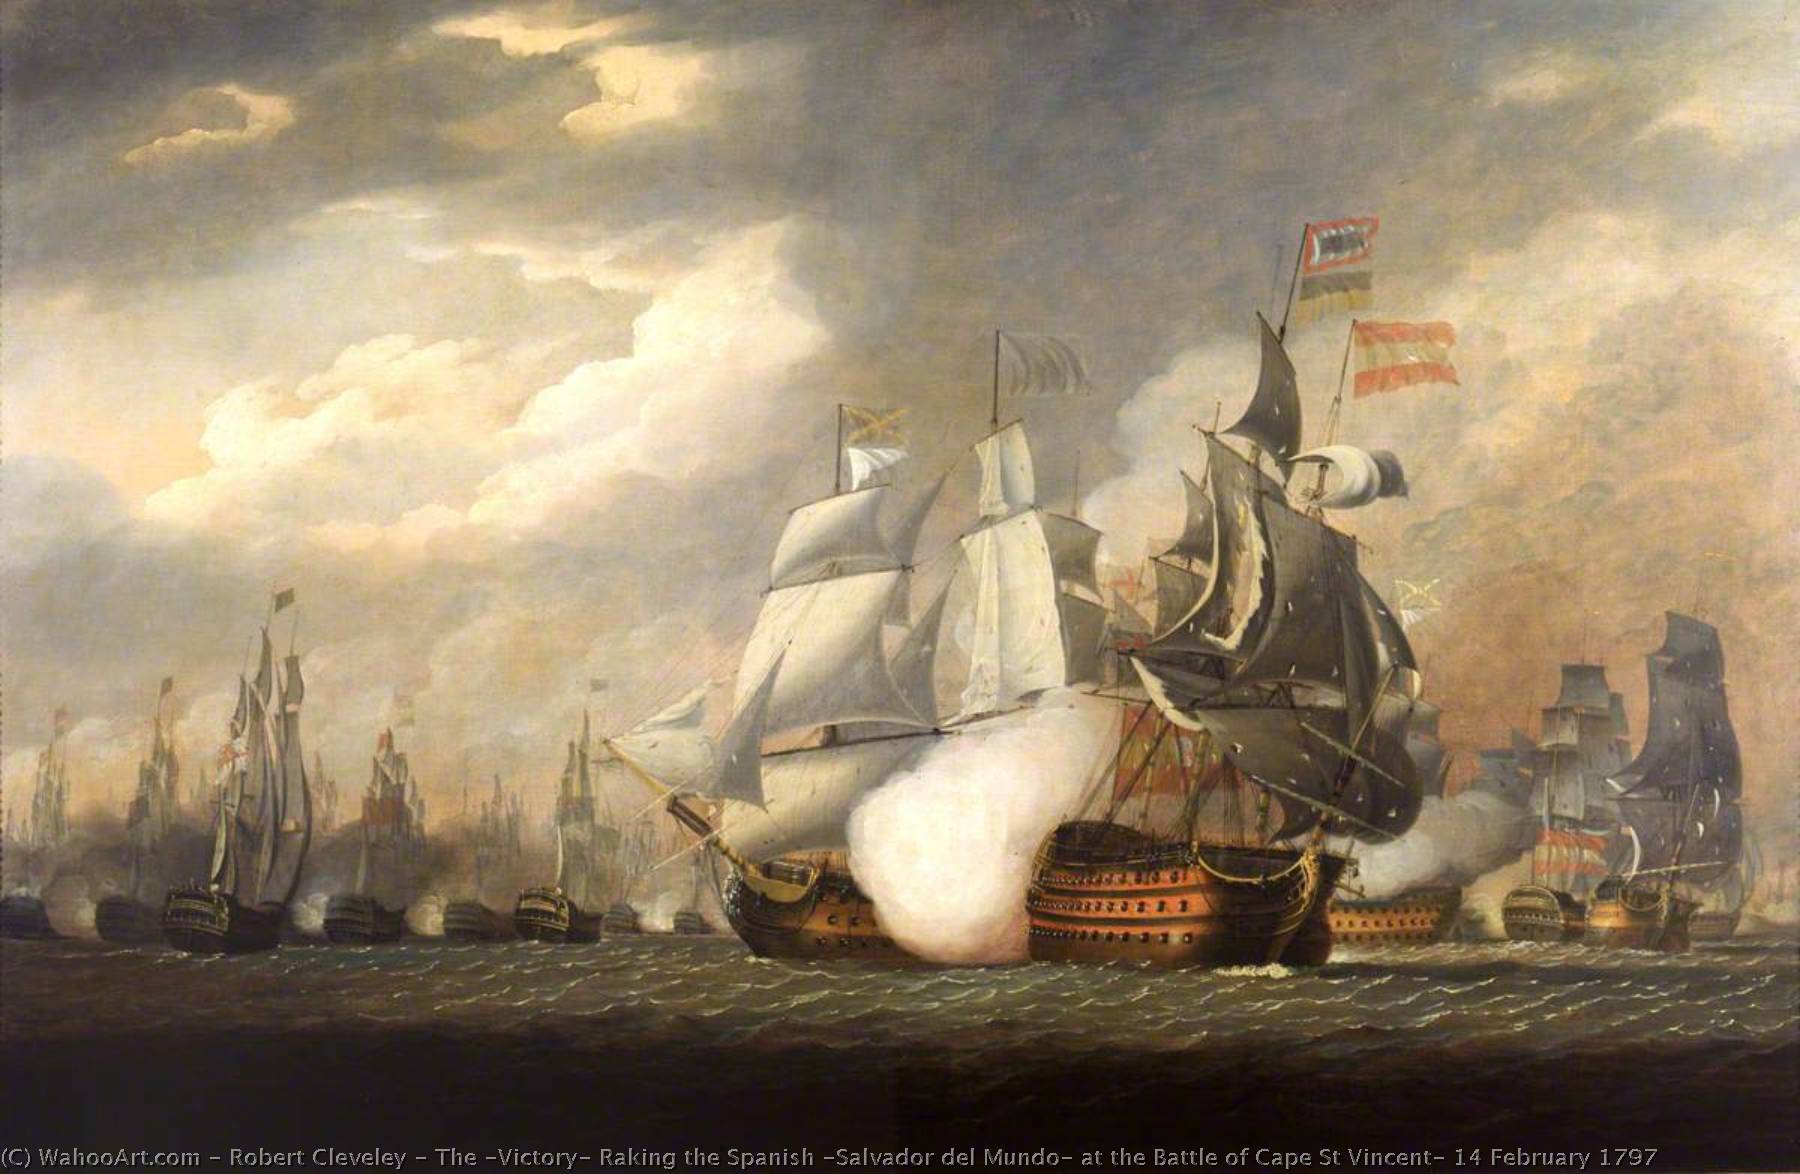 Order Oil Painting Replica The `Victory` Raking the Spanish `Salvador del Mundo` at the Battle of Cape St Vincent, 14 February 1797, 1798 by Robert Cleveley (1747-1809) | ArtsDot.com